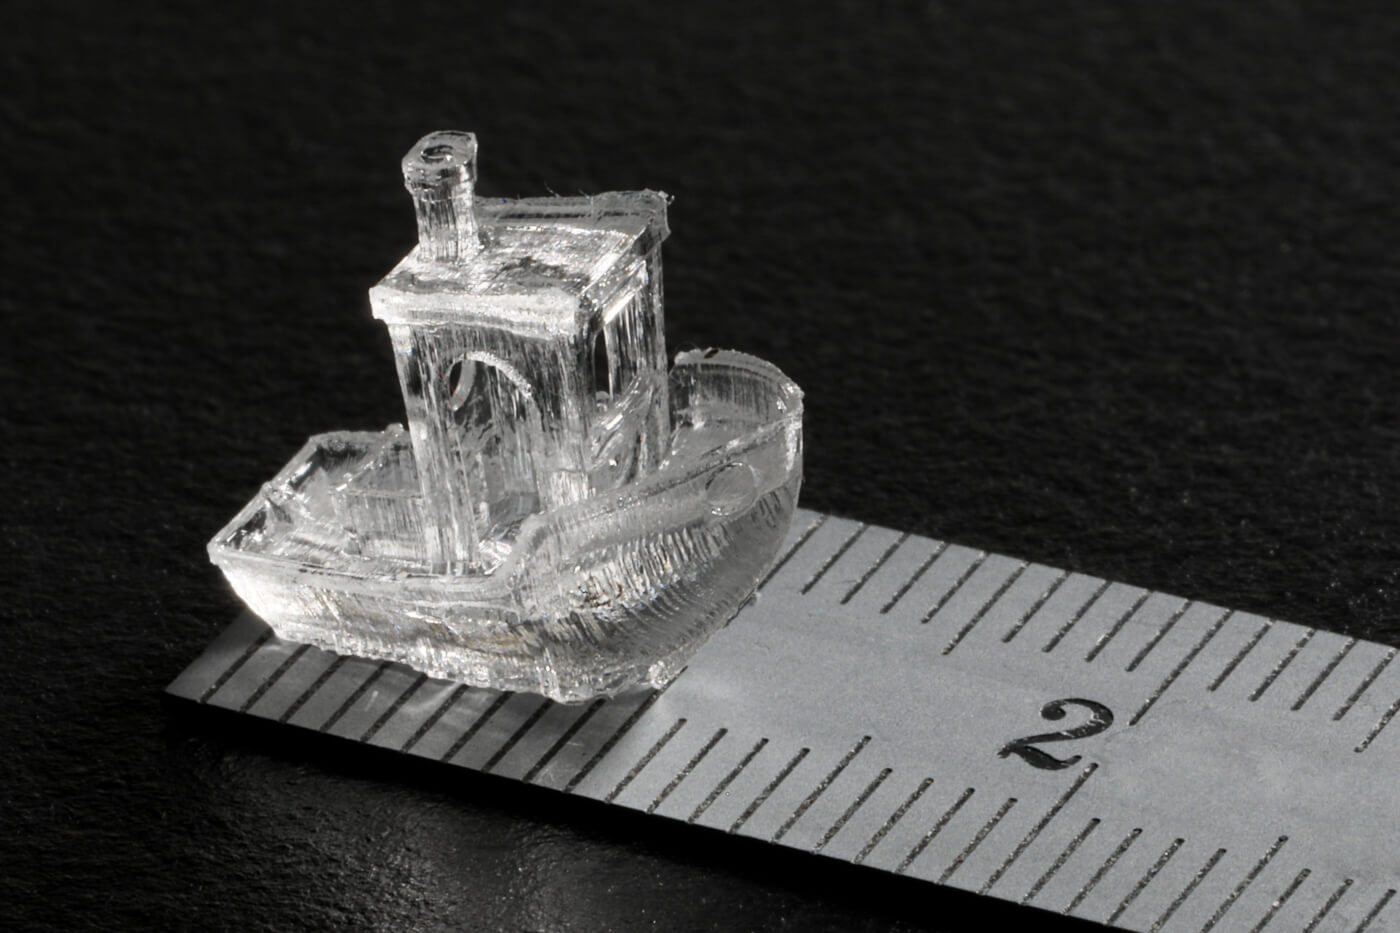 It's now possible to 3D print entire objects in seconds